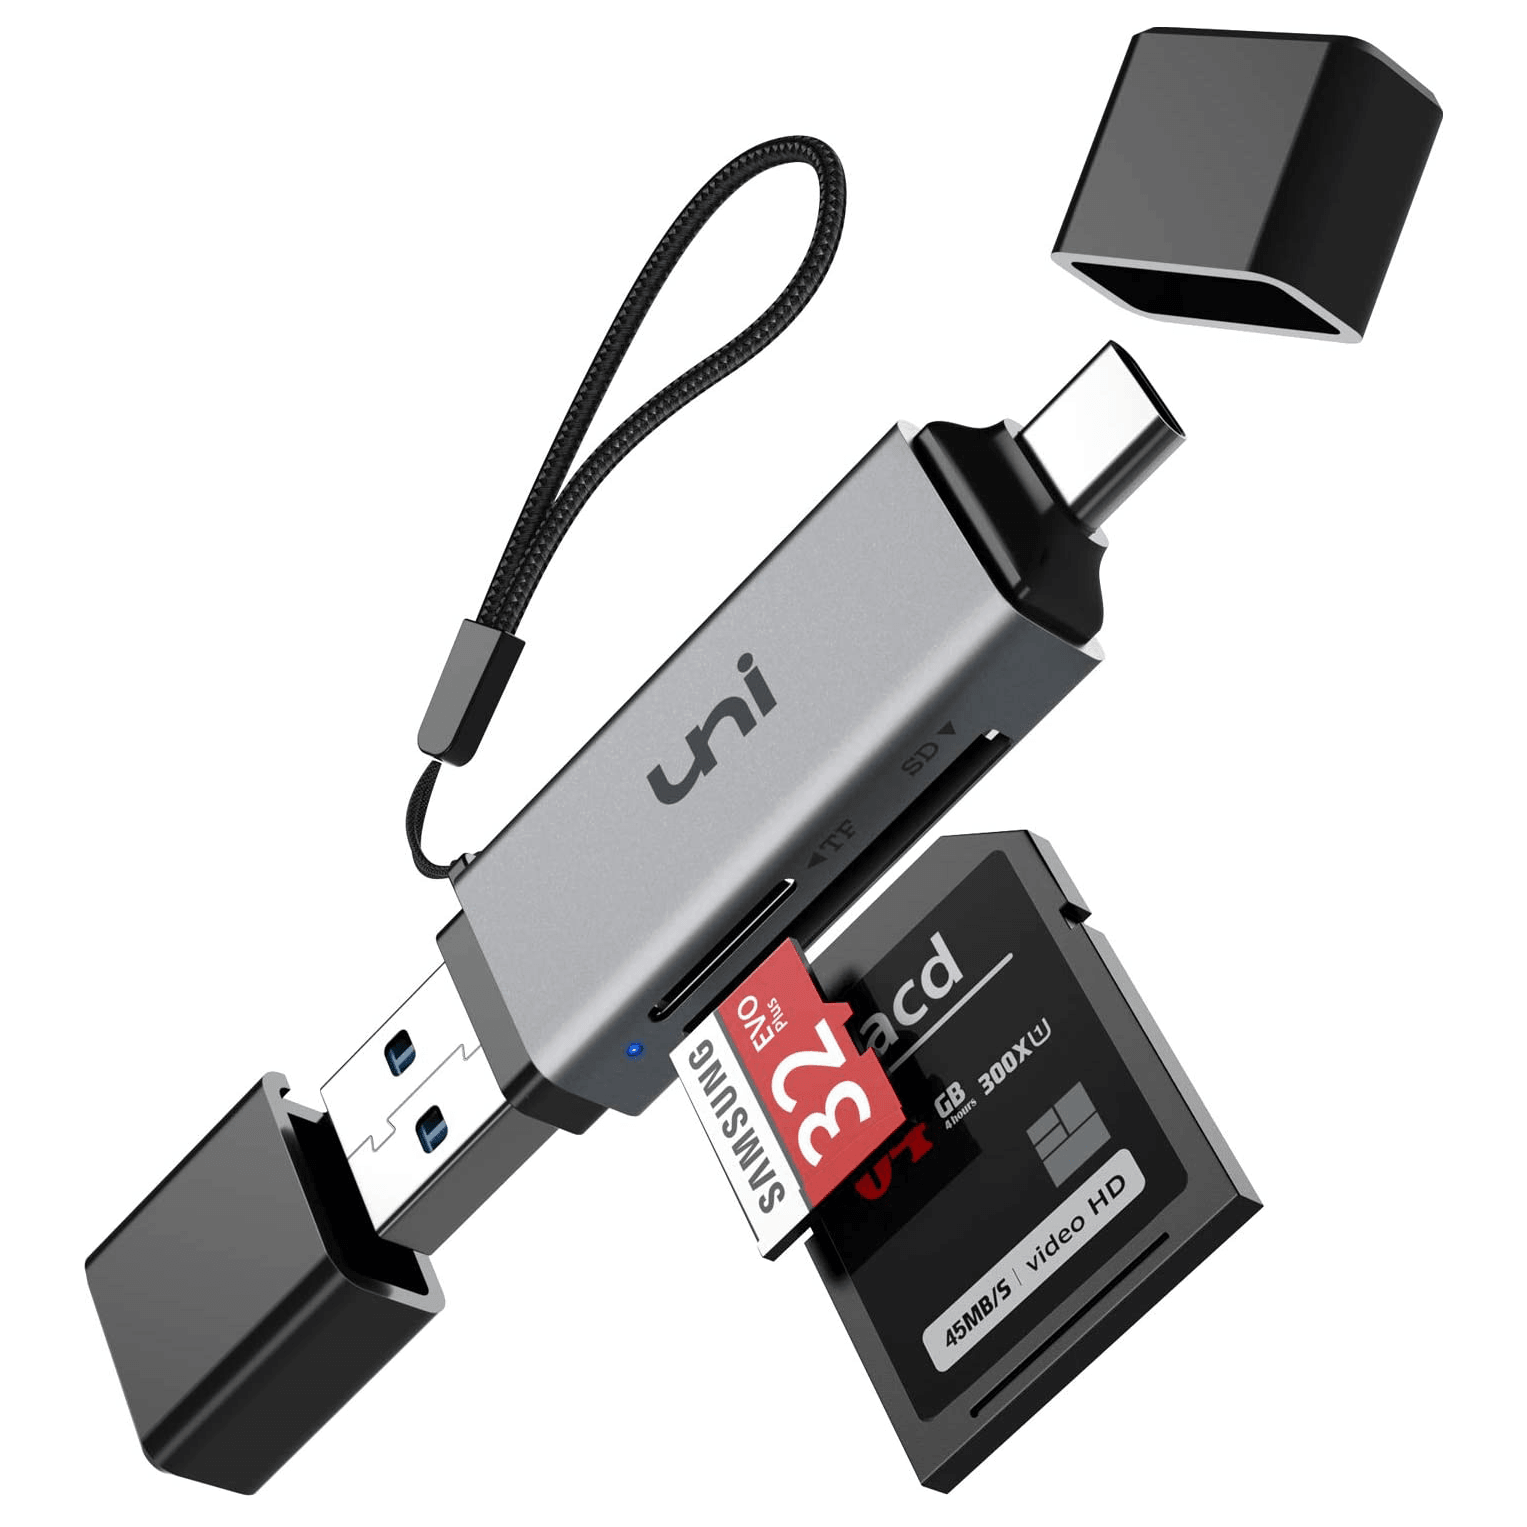 SD Card Reader, Magnetic Cap Triangle Memory Card for iPhone/iPad, USB C  and USB A - W1106 - IdeaStage Promotional Products